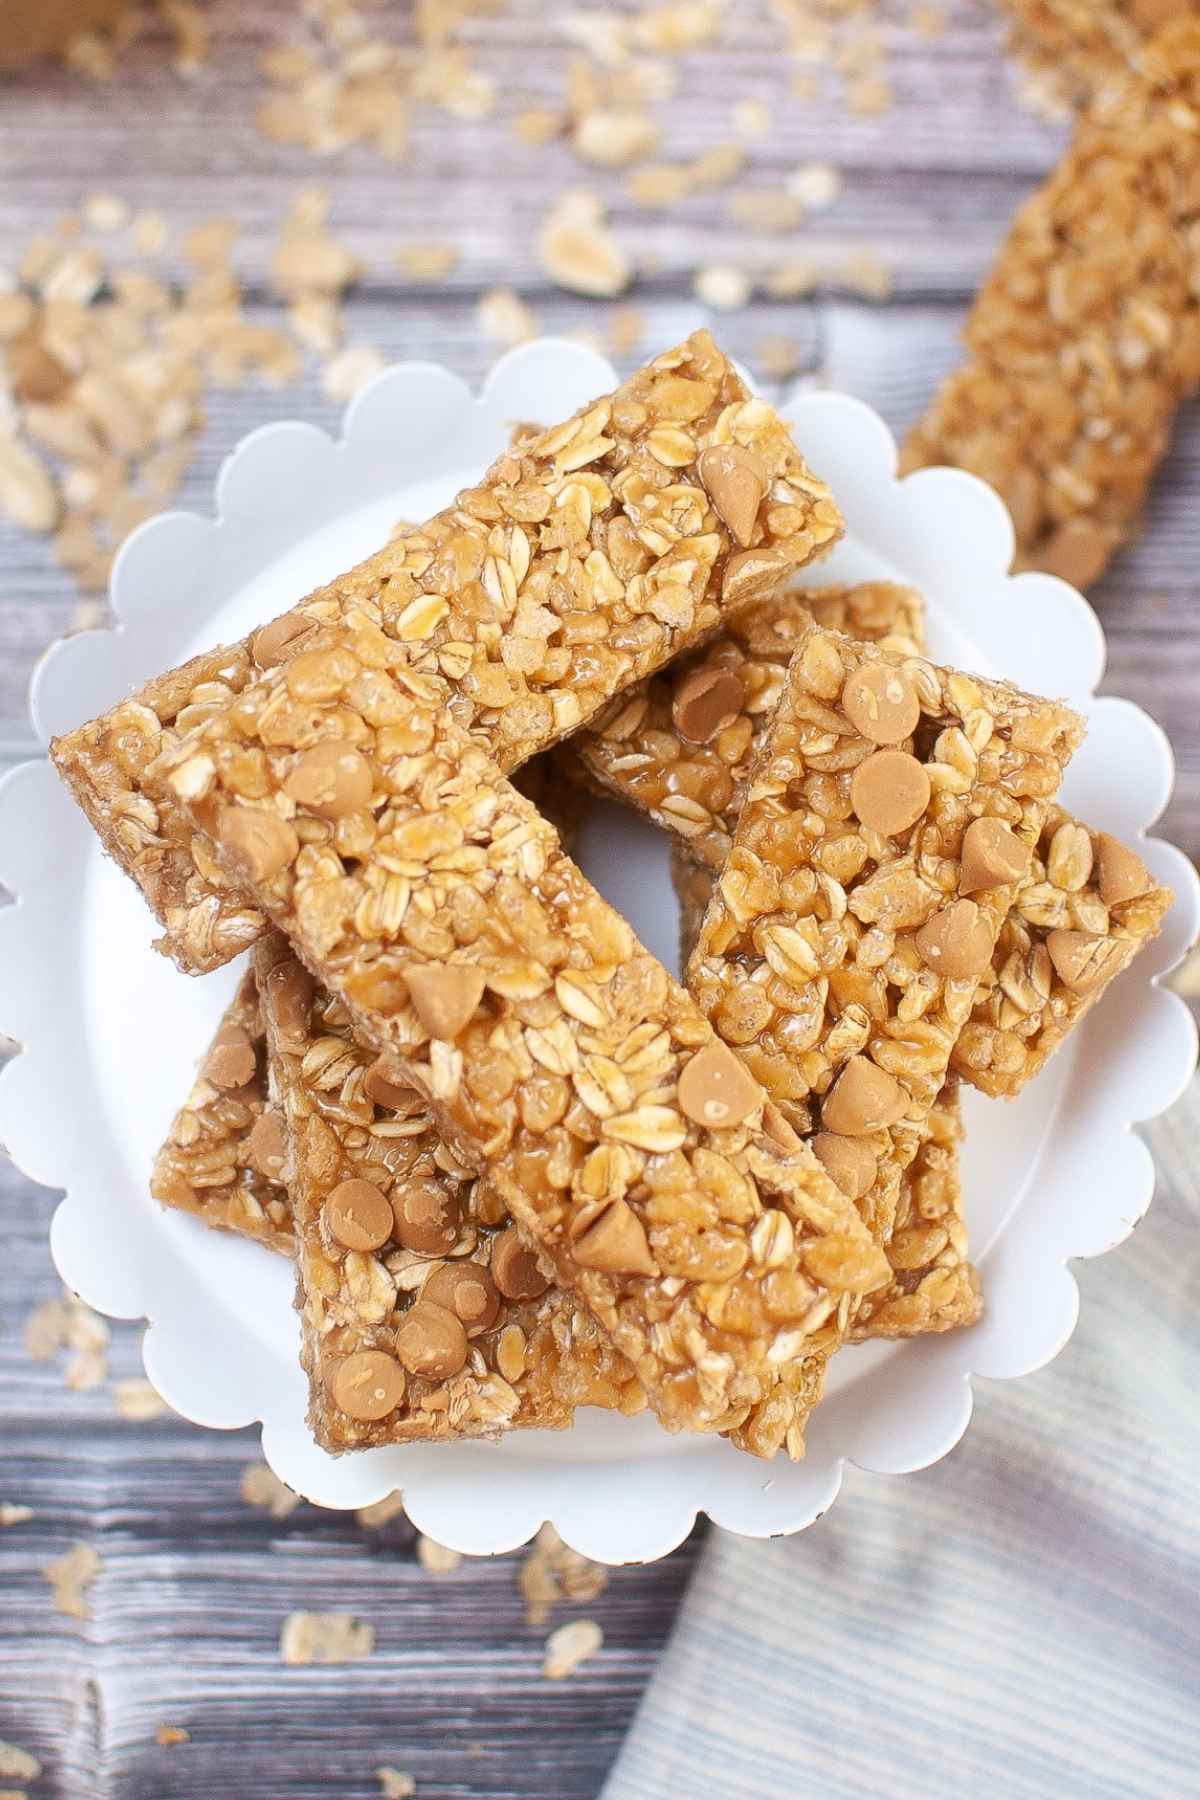 Overhead image of peanut butter granola bars on a white plate.